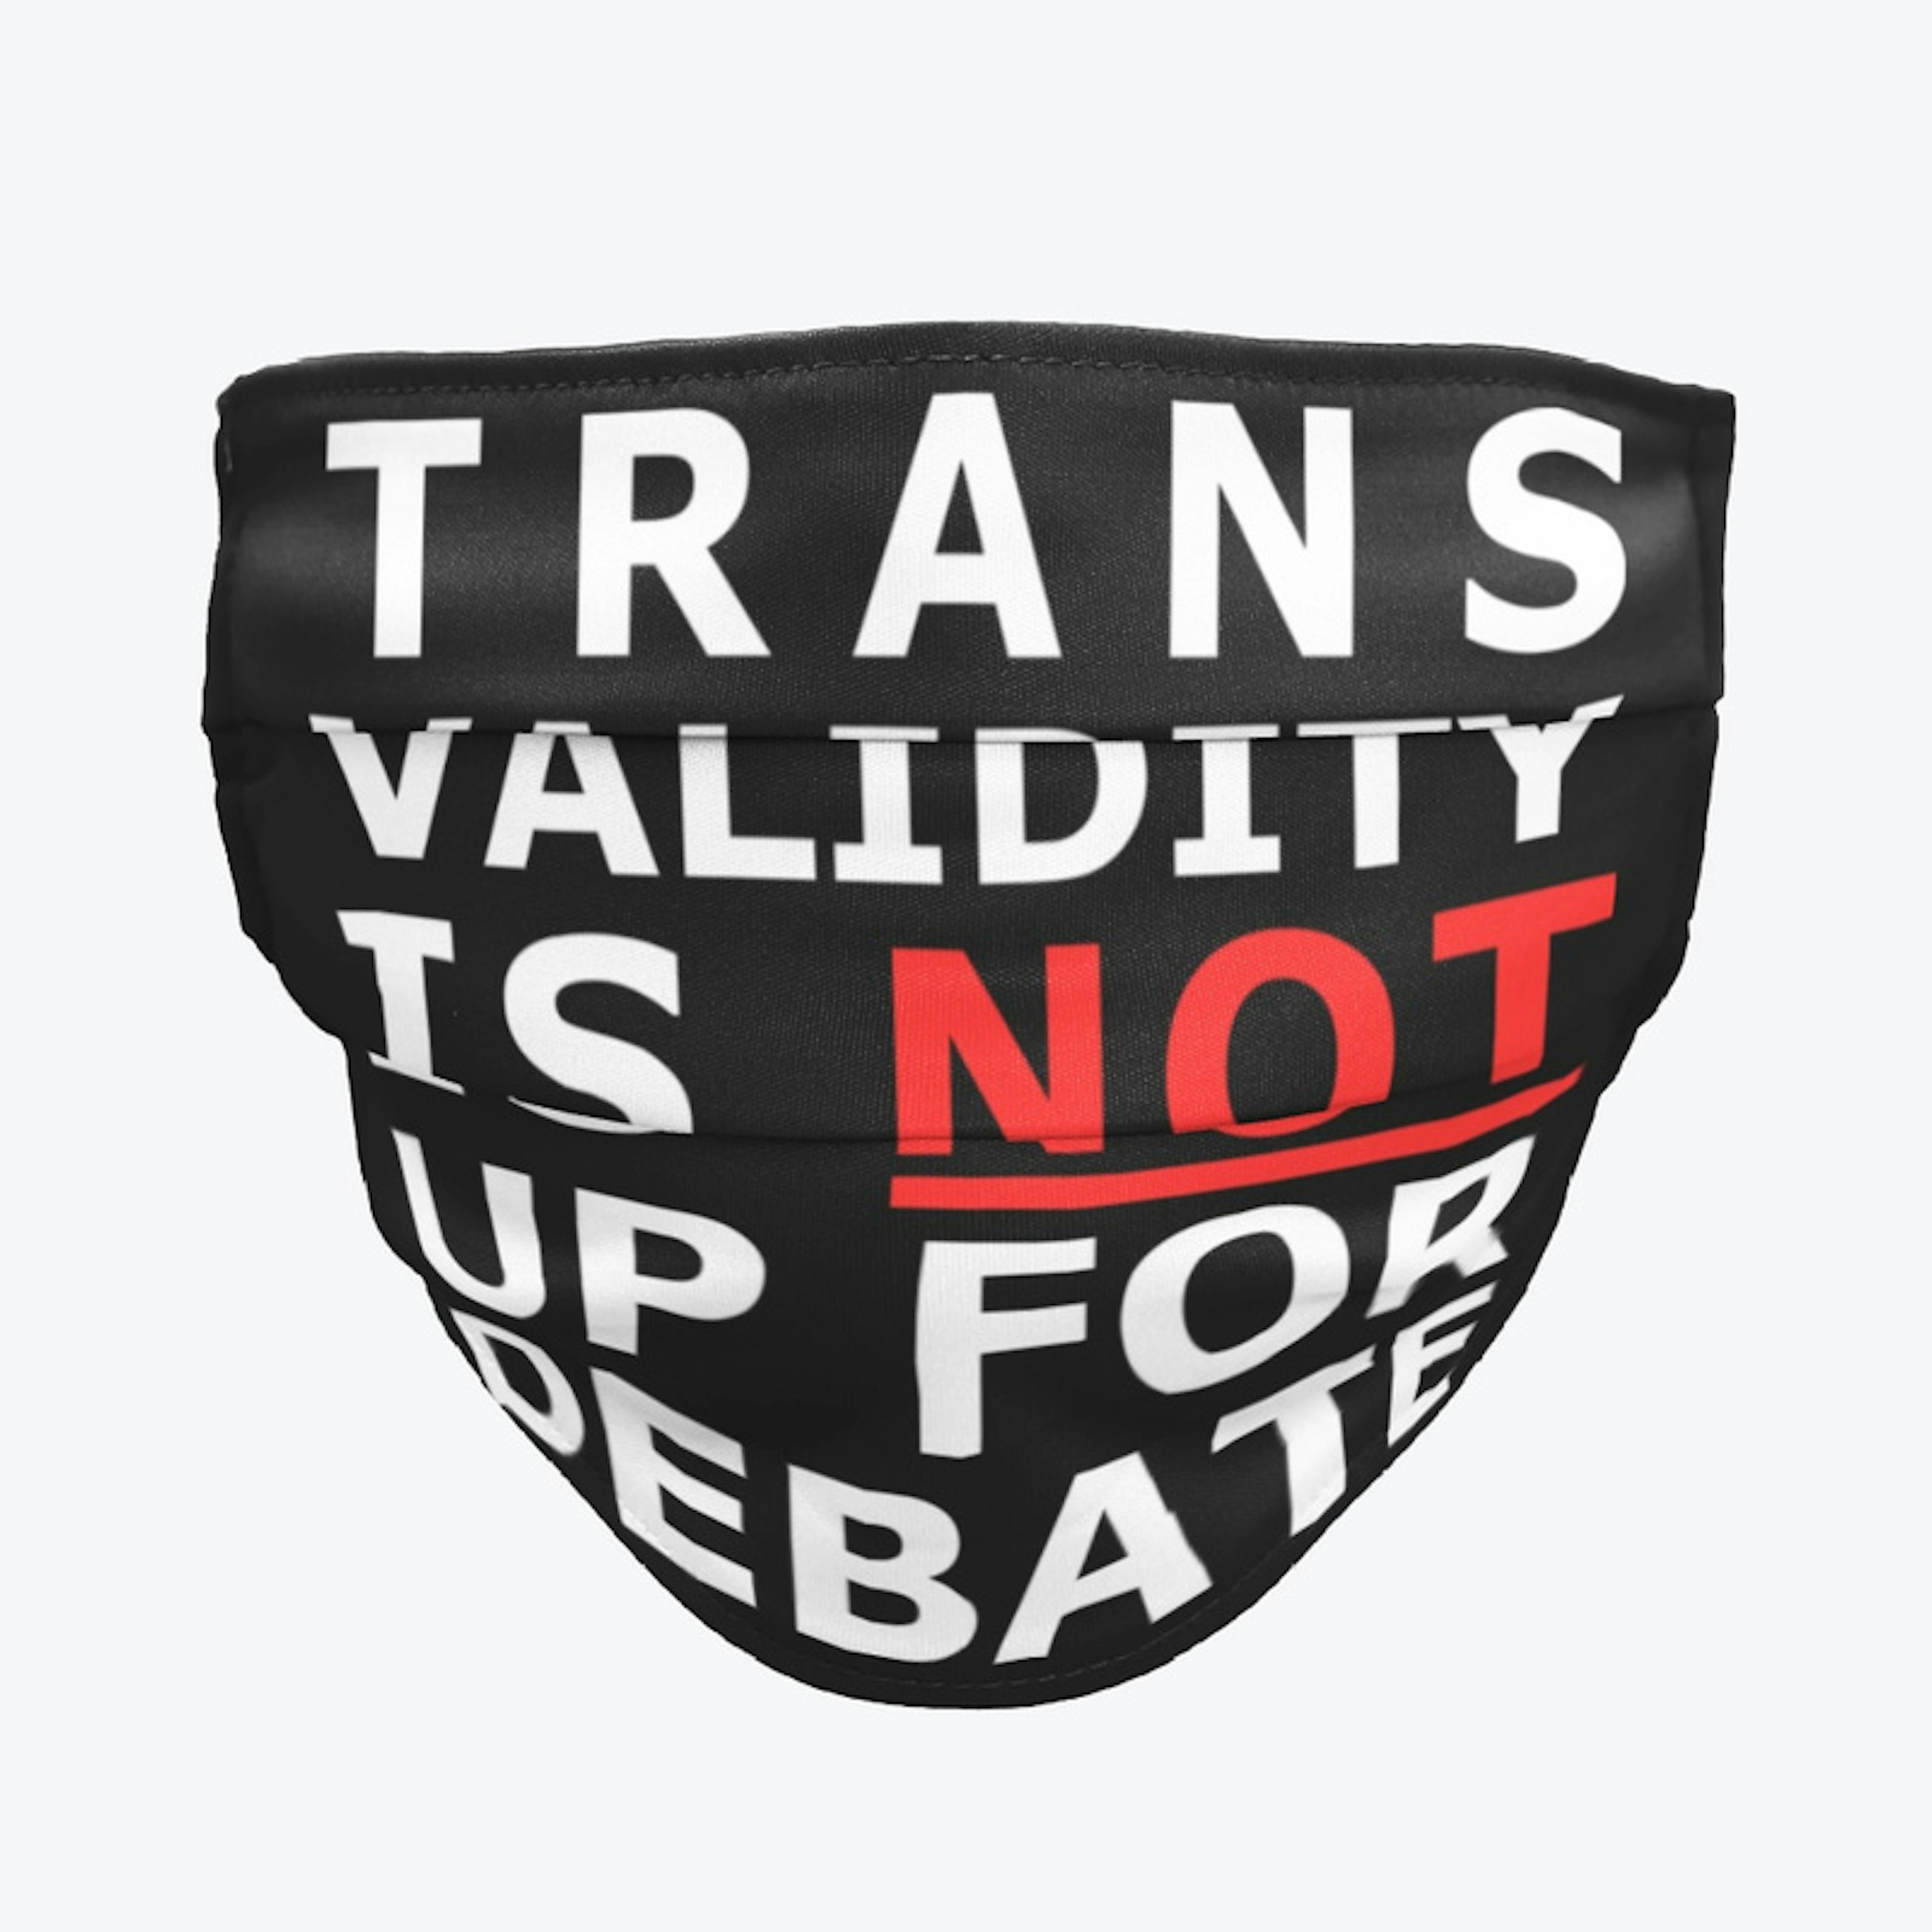 Trans Validity Is Not Up For Debate